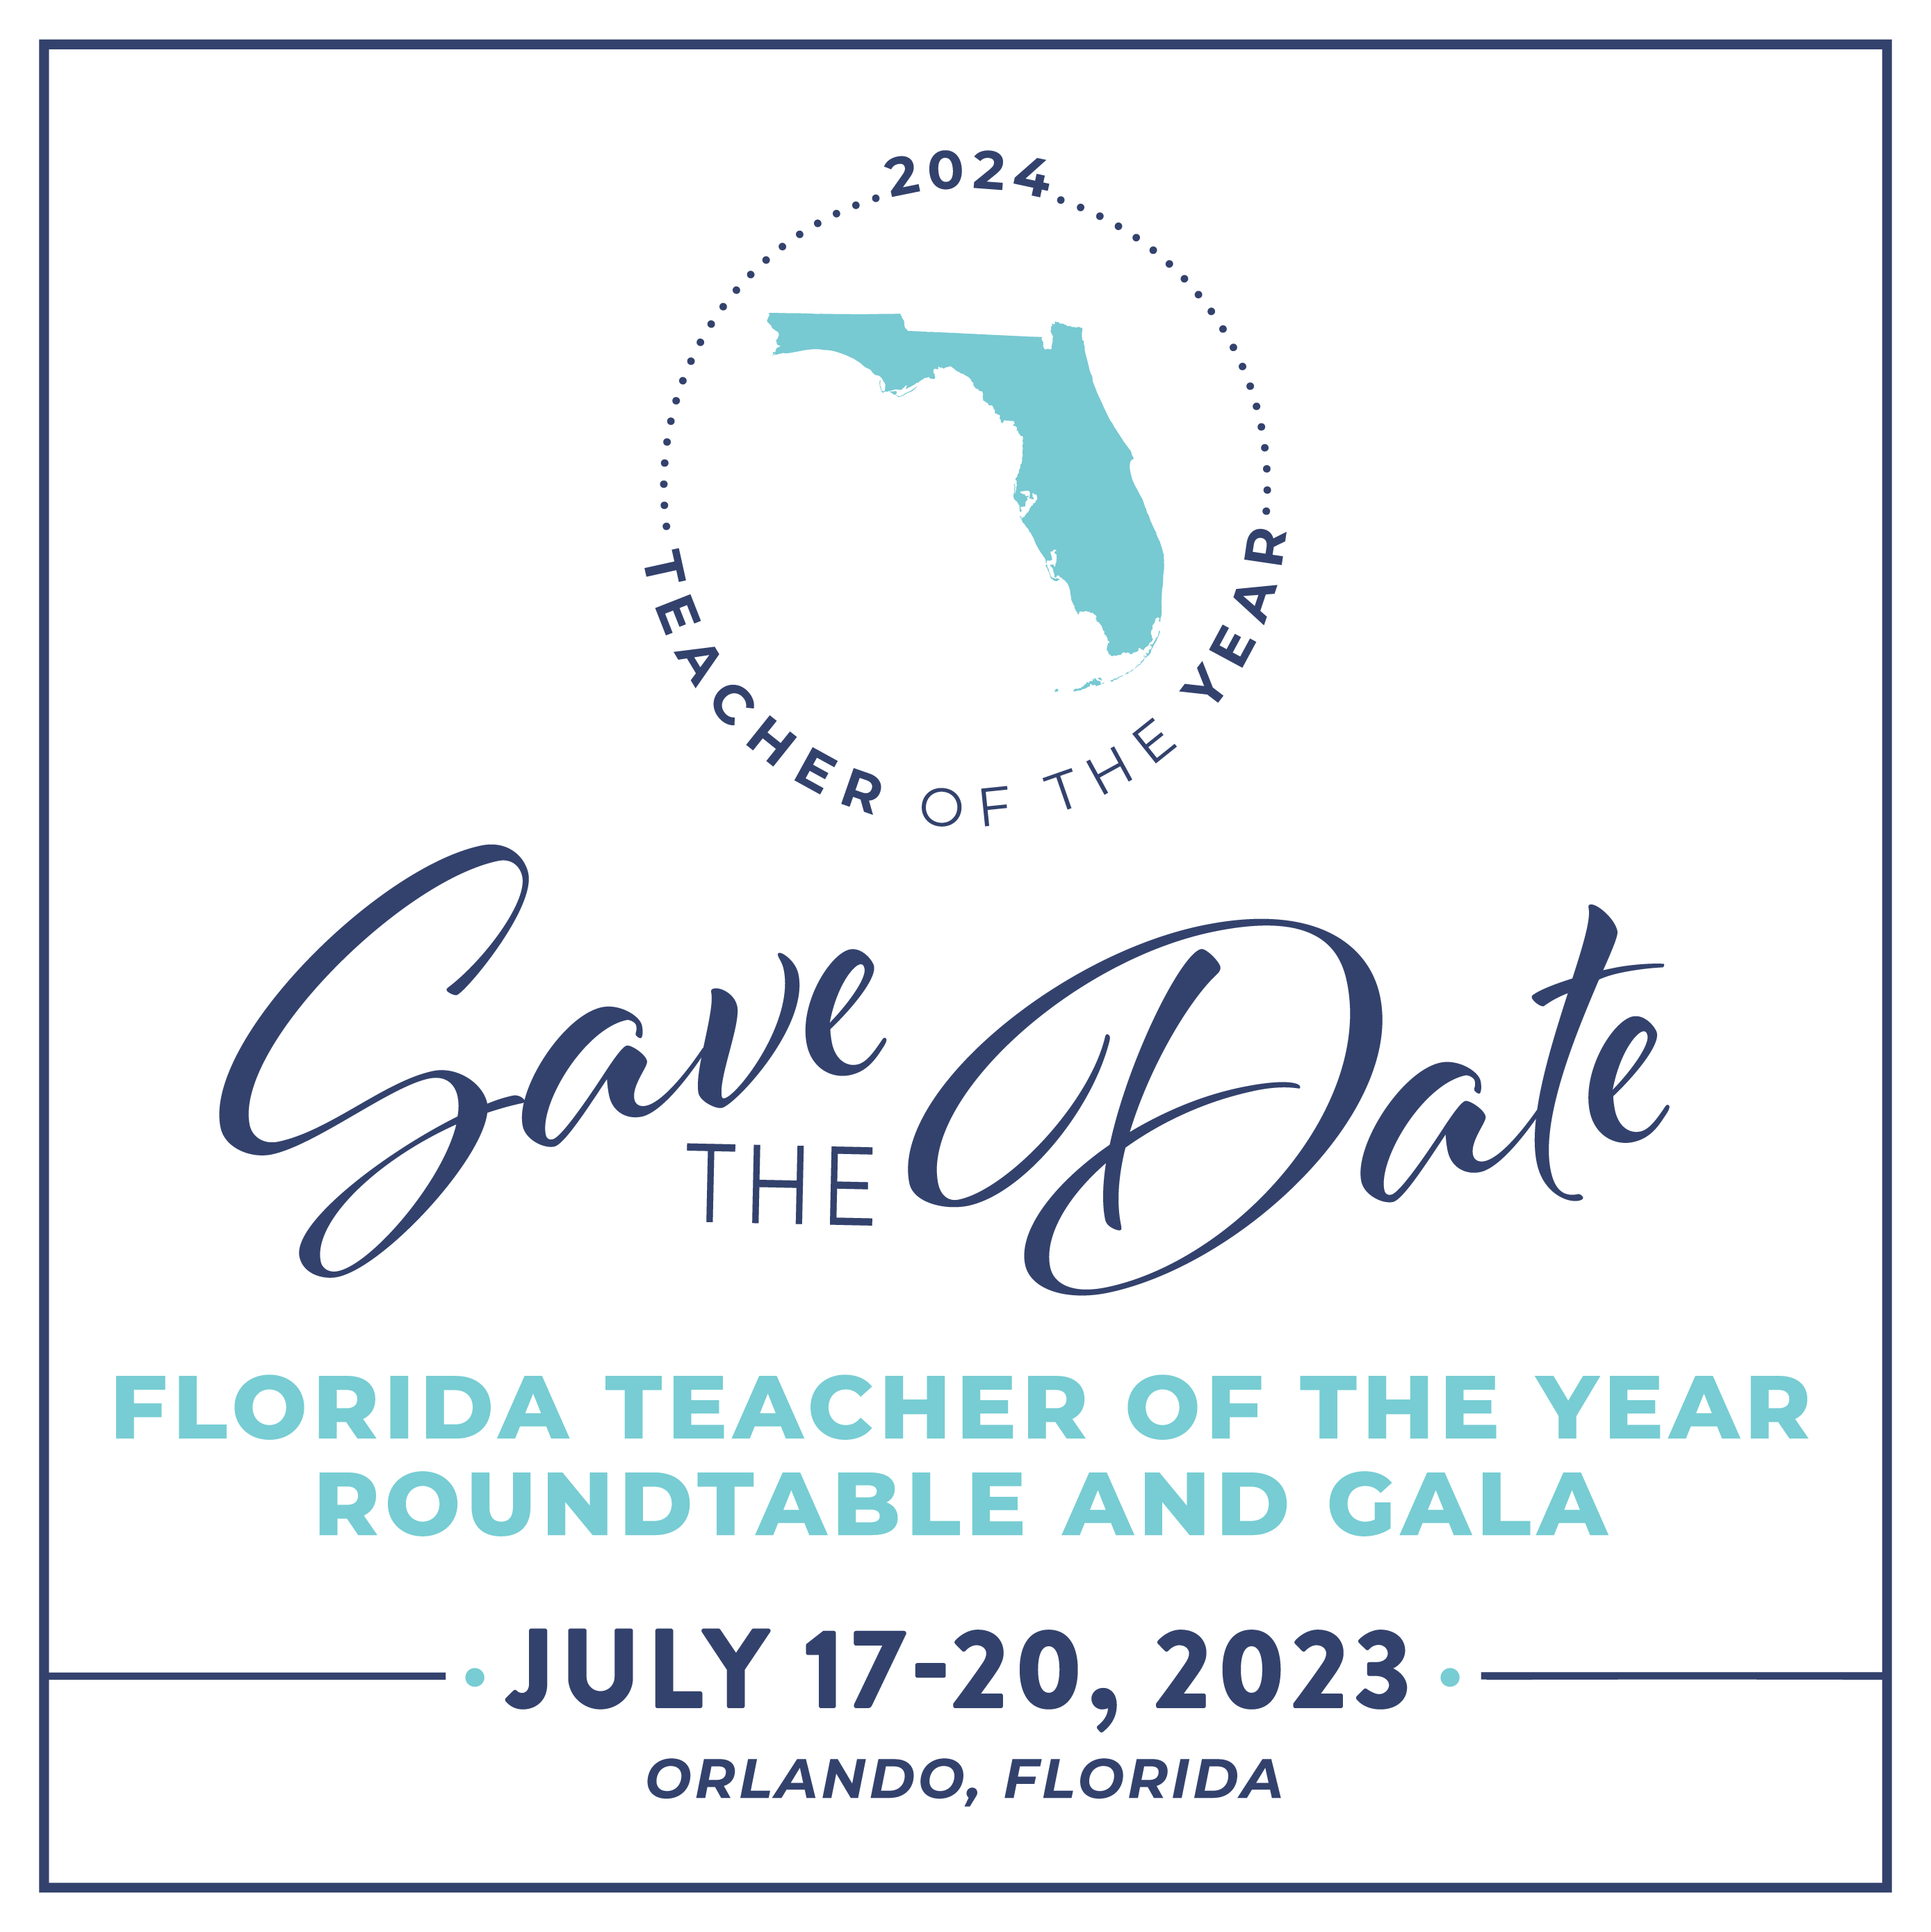 2024 Teacher of the Year - Save the Date - Florida Teacher of the Year Roundtable and Gala July 17-20, 2023 - Orlando, FL